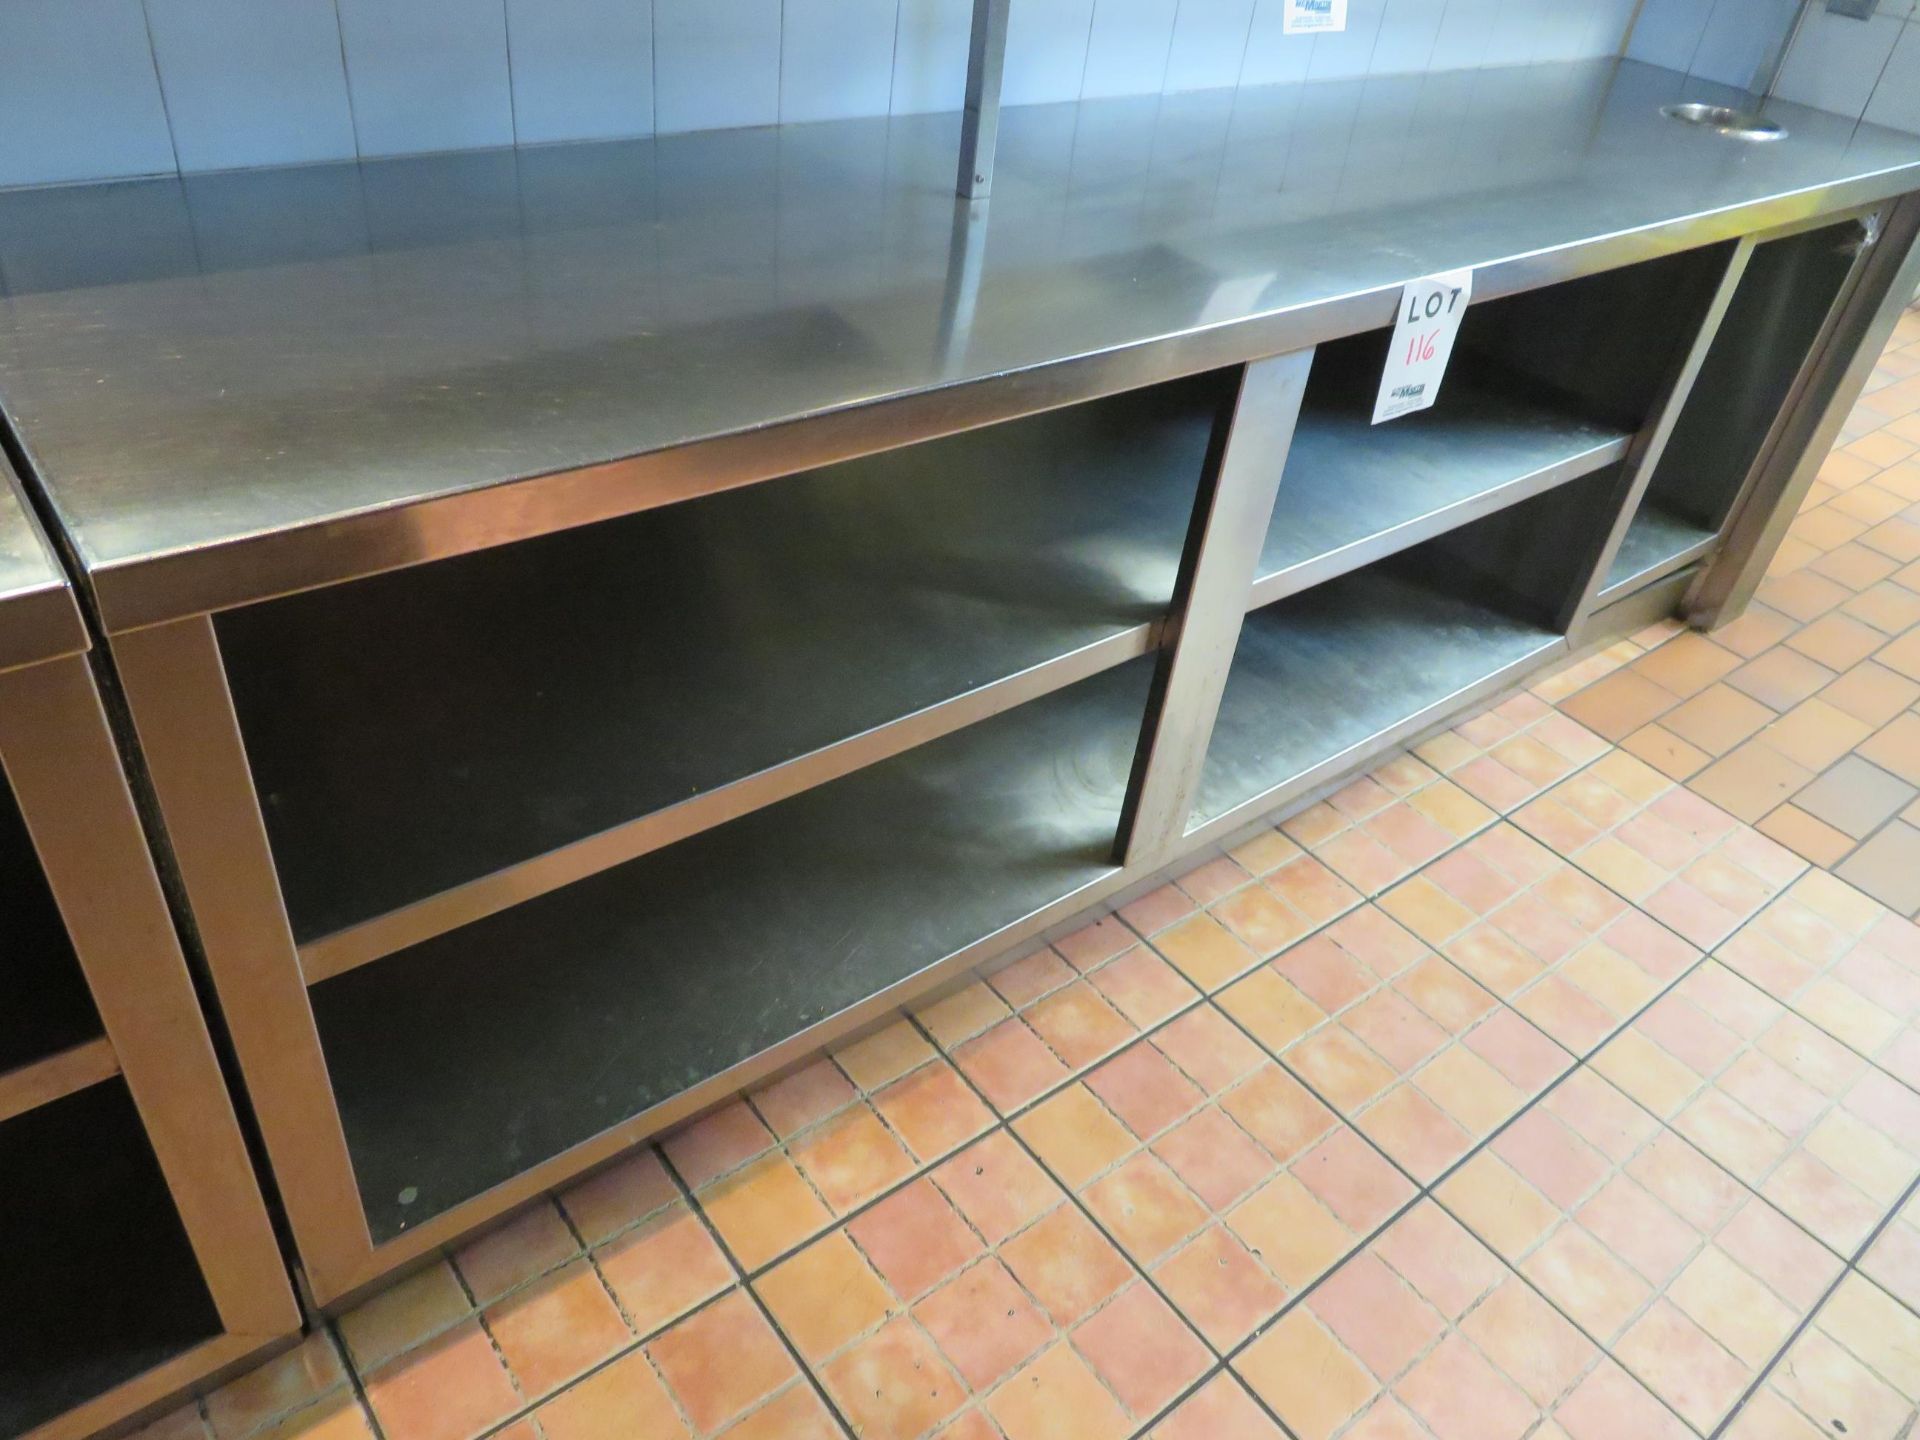 Stainless steel service counter approx. 102"w x 24"d x 35"h